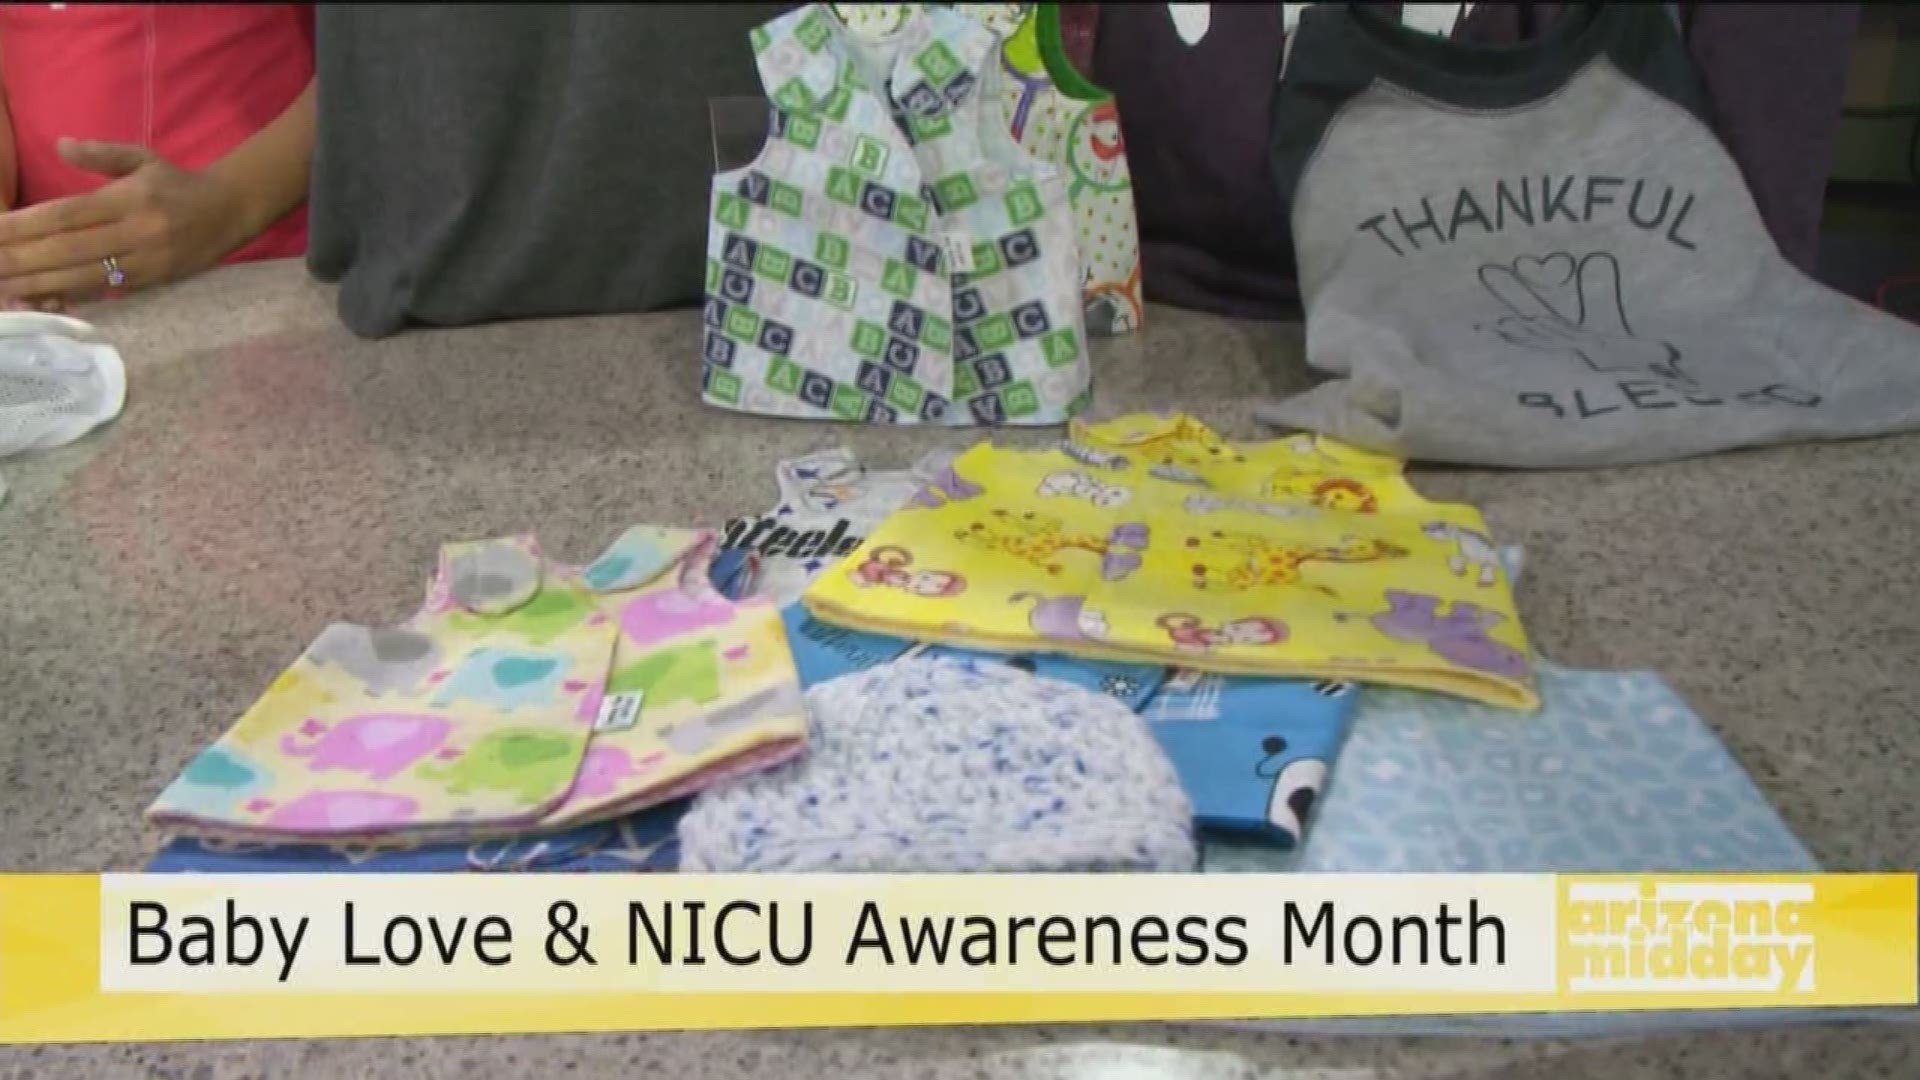 Nadine Bubeck shows us handmade designs, custom necklaces and more in honor of NICU Awareness Month.